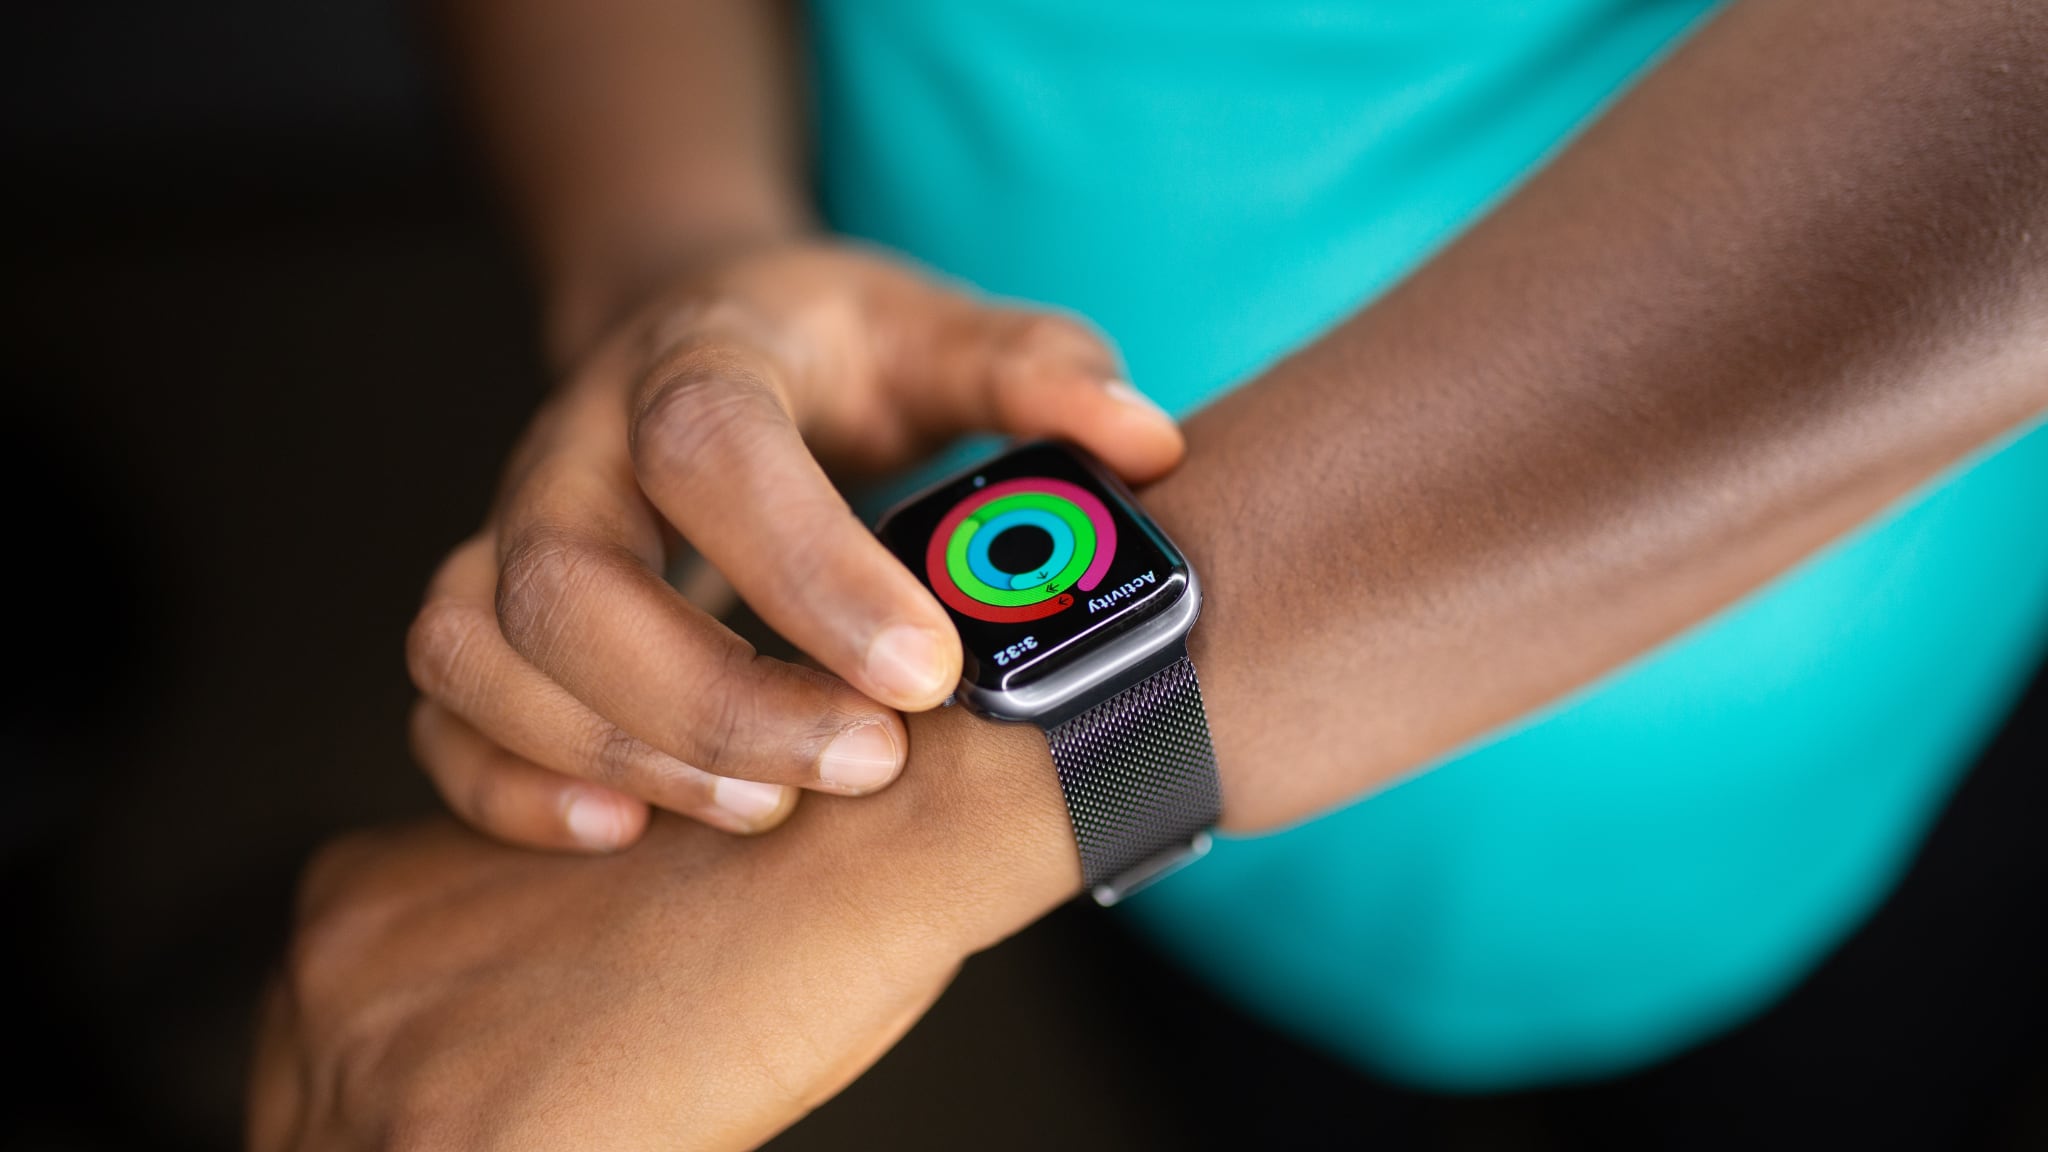 A closeup photograph of a female athlete's hand wearing an Apple Watch showing the Move, Exercise and Stand rings nearly closed